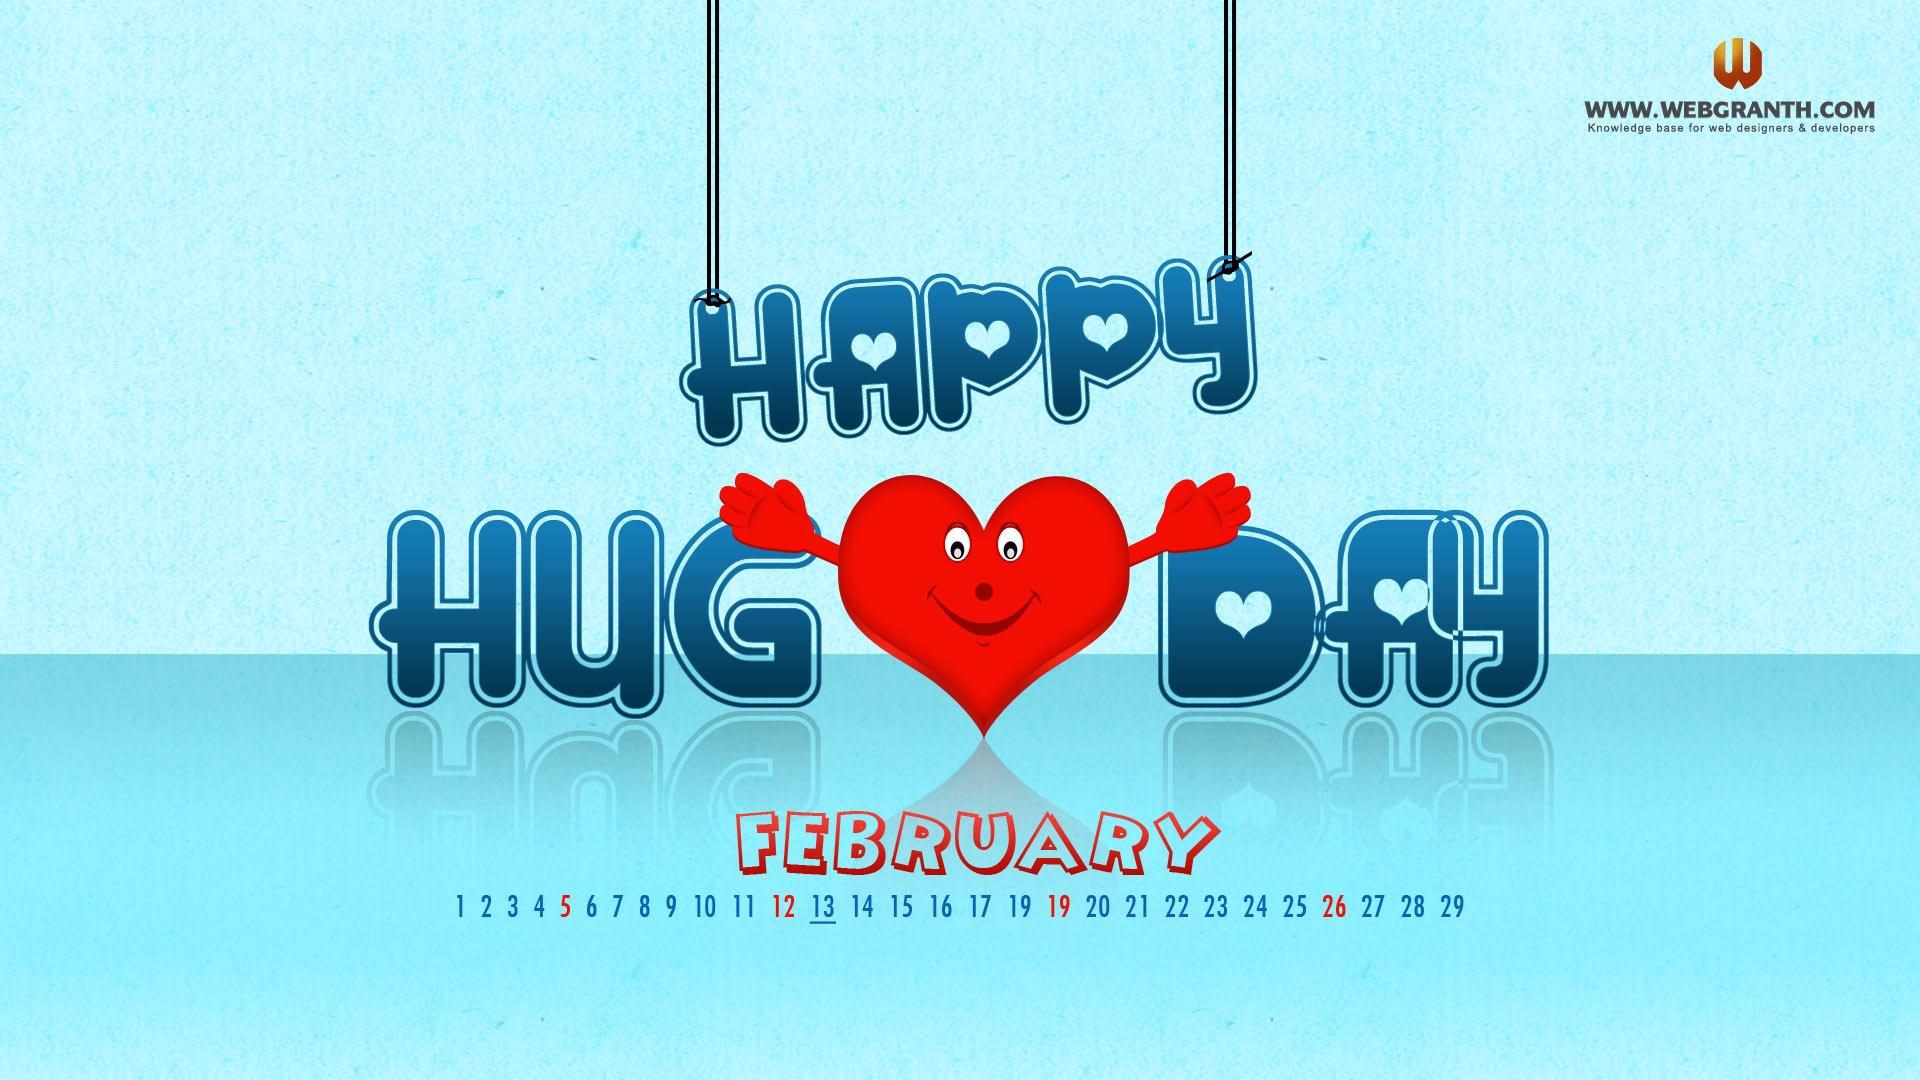 Sometimes It's Better To Put Love Into Hugs Happy Hug Day